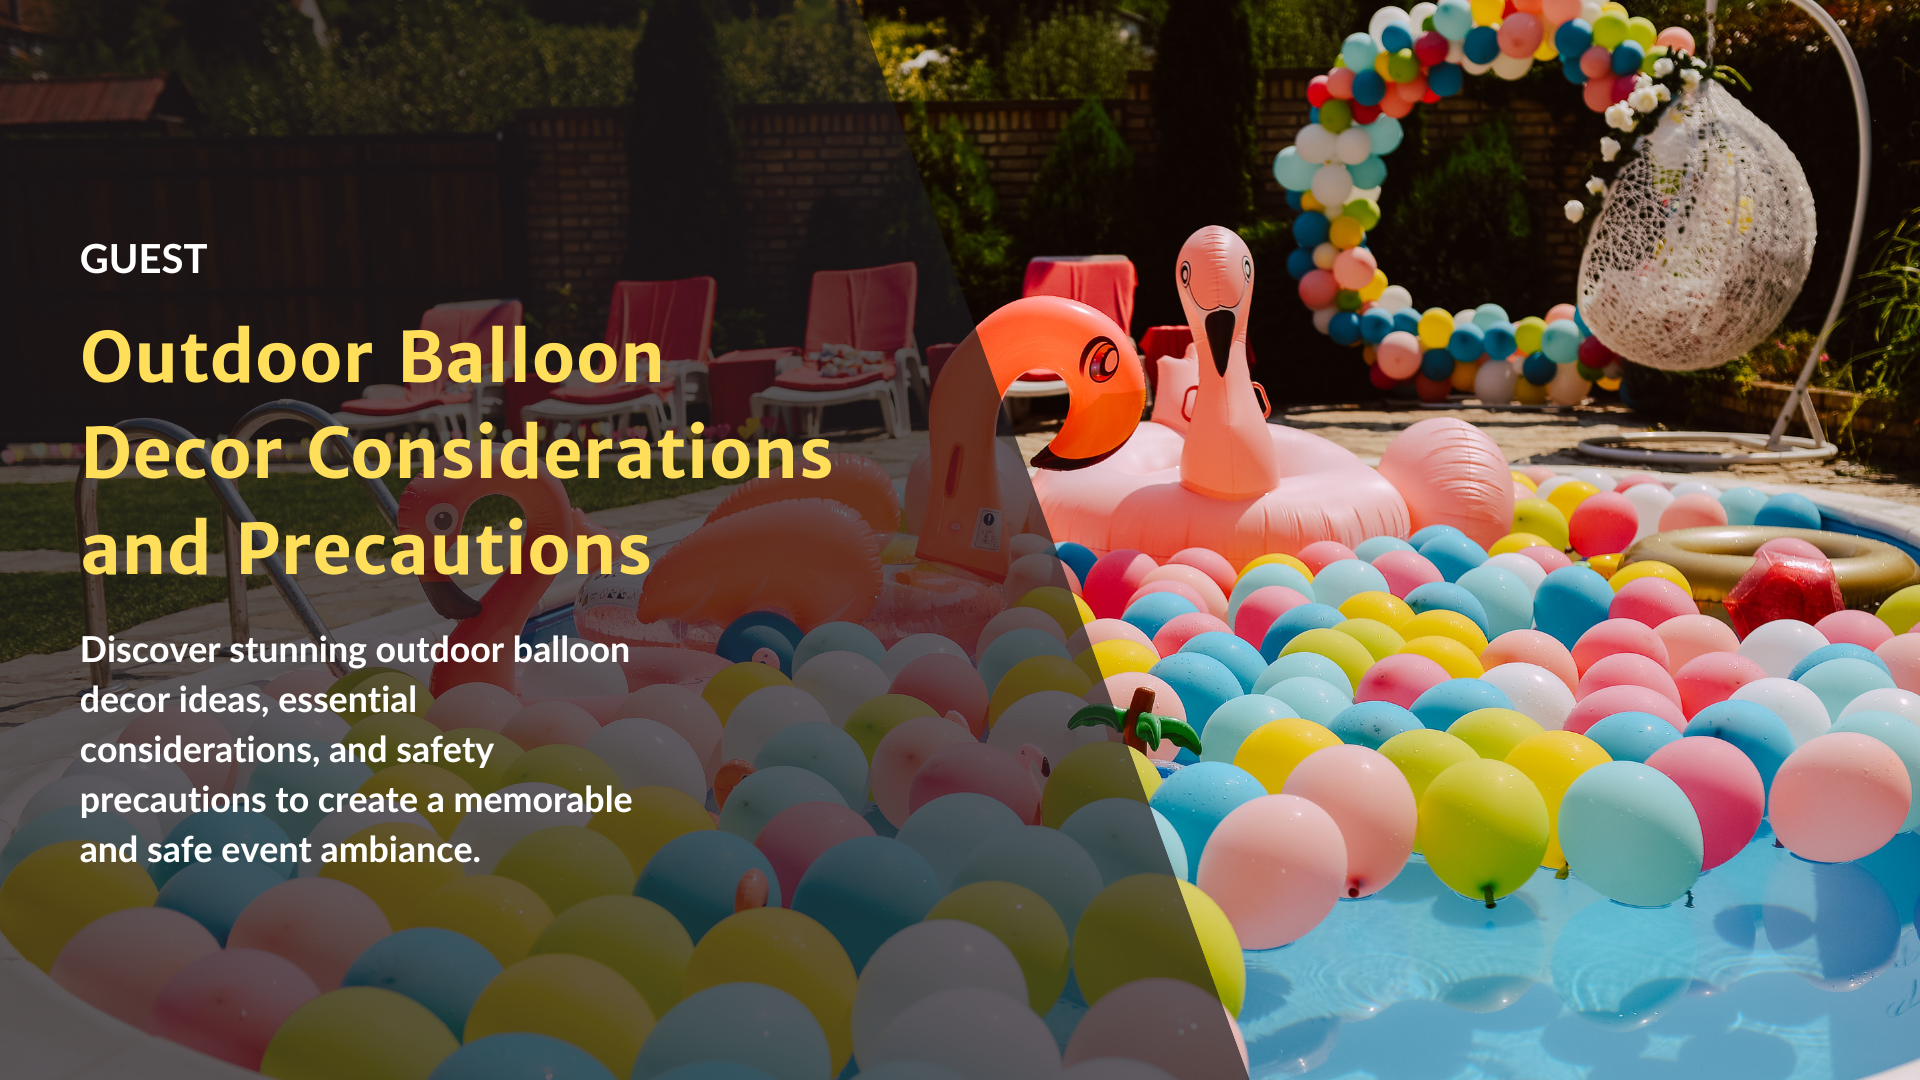 a poster for outdoor balloon decor considerations and precautions